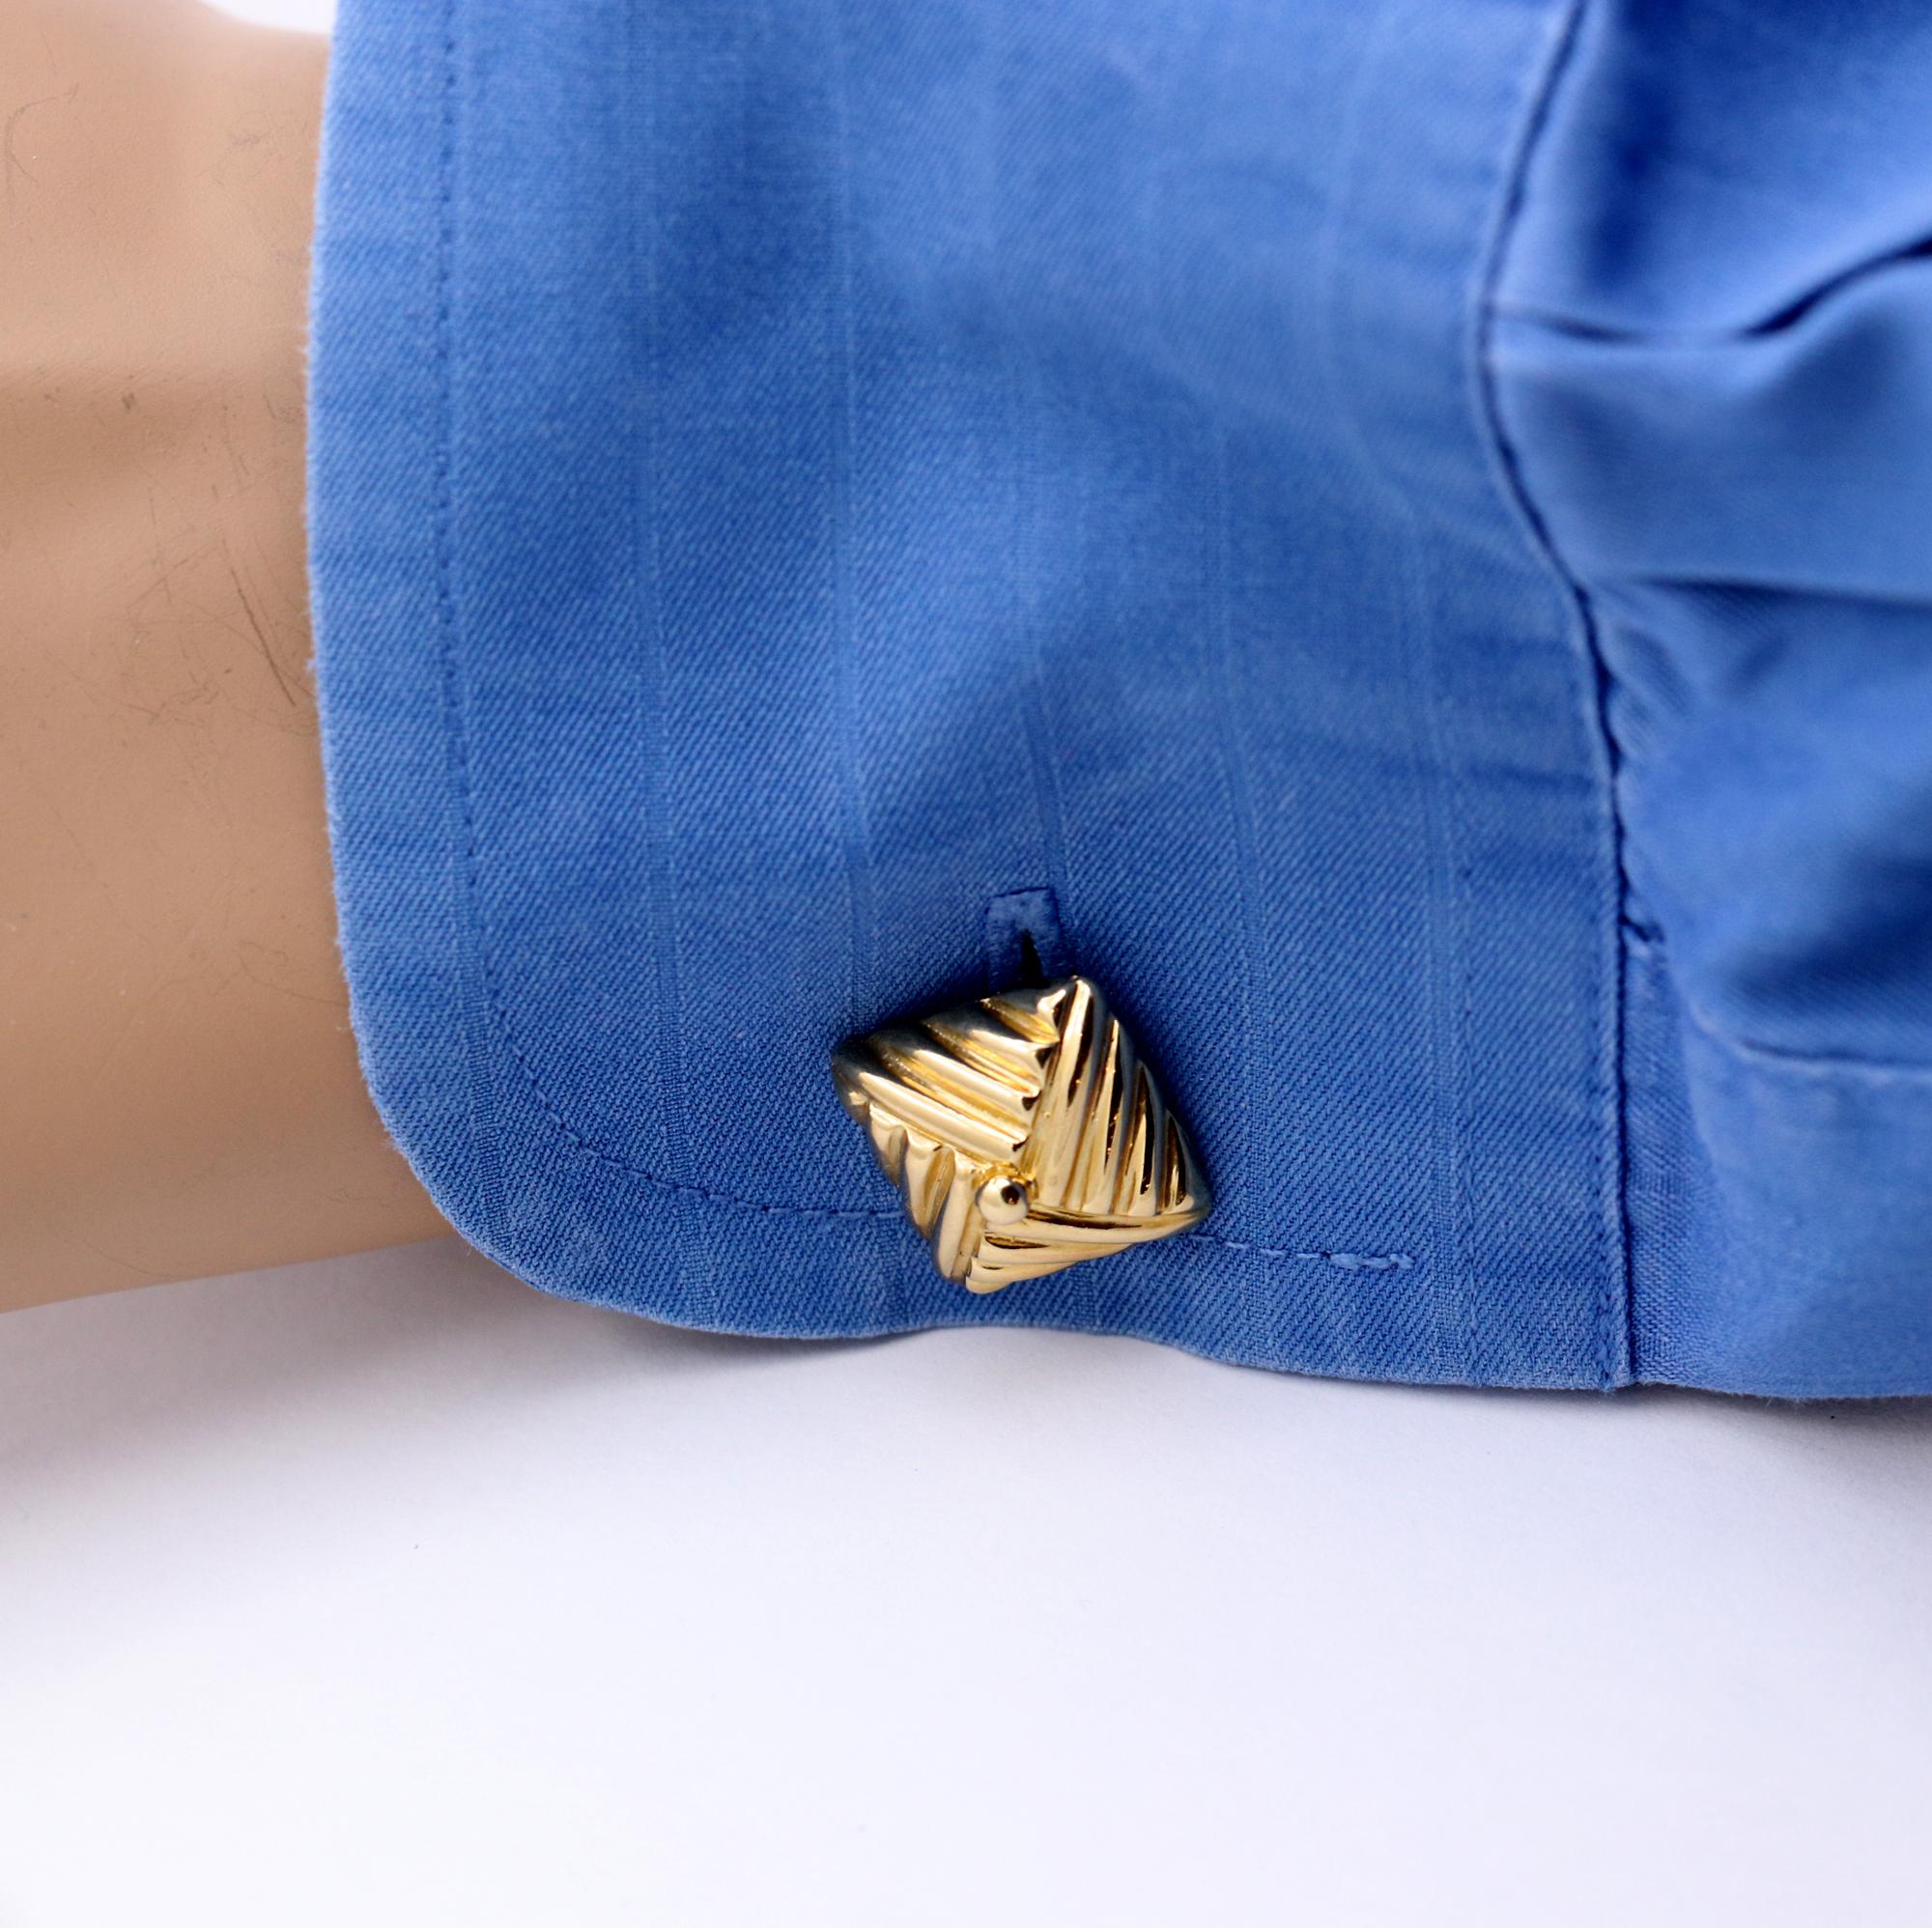 A pair of 18K yellow gold cuff links, measuring just over 1/2 an inch wide, and styled like square knots. With a ribbed design, they appear as though fabric was folded into this great design. Signed Emis, for Emis Beros of Palm Beach Florida, they